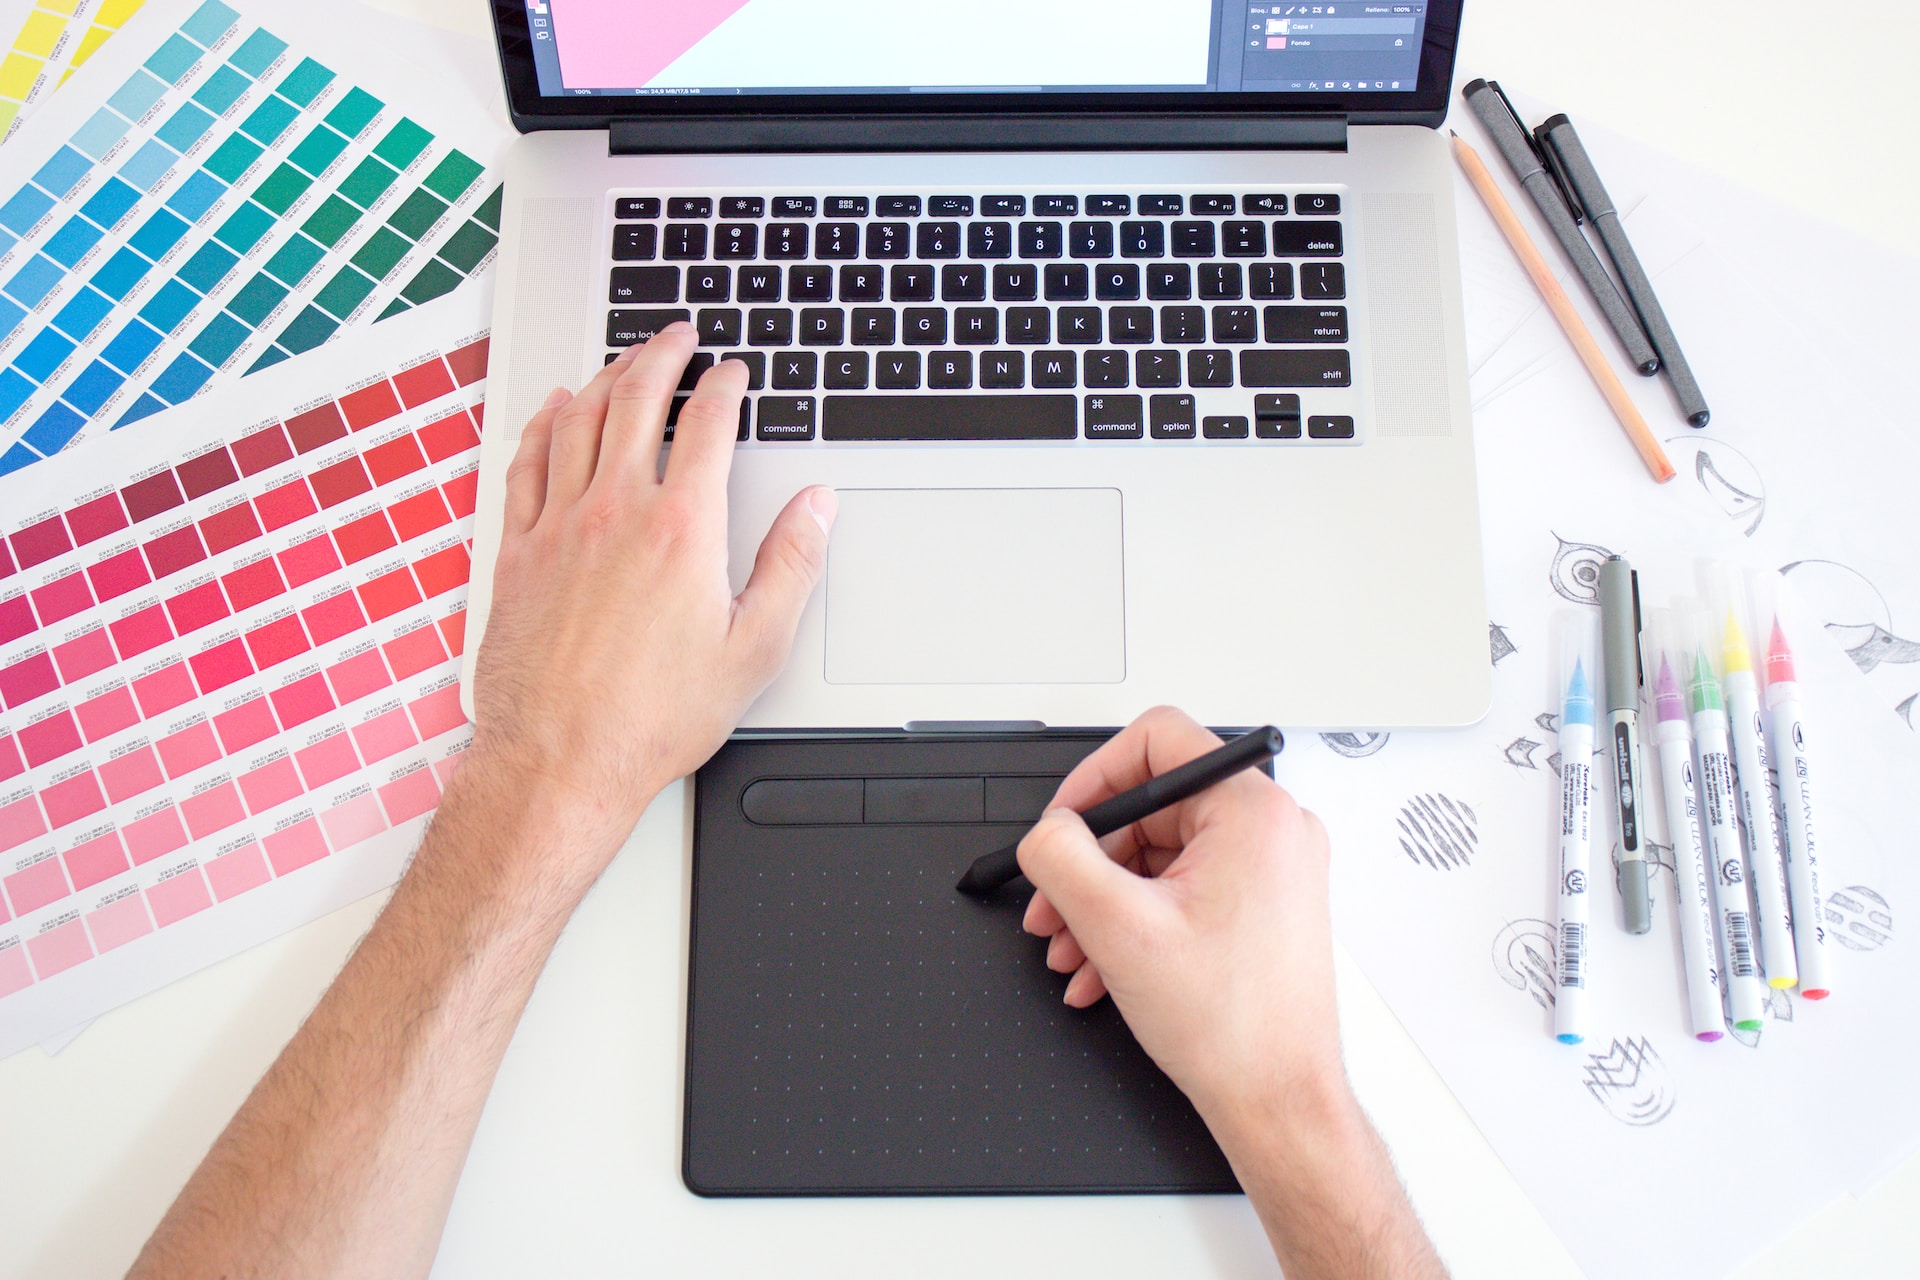 Graphic designer working on a Macbook laptop using a trackpad, color charts and markers